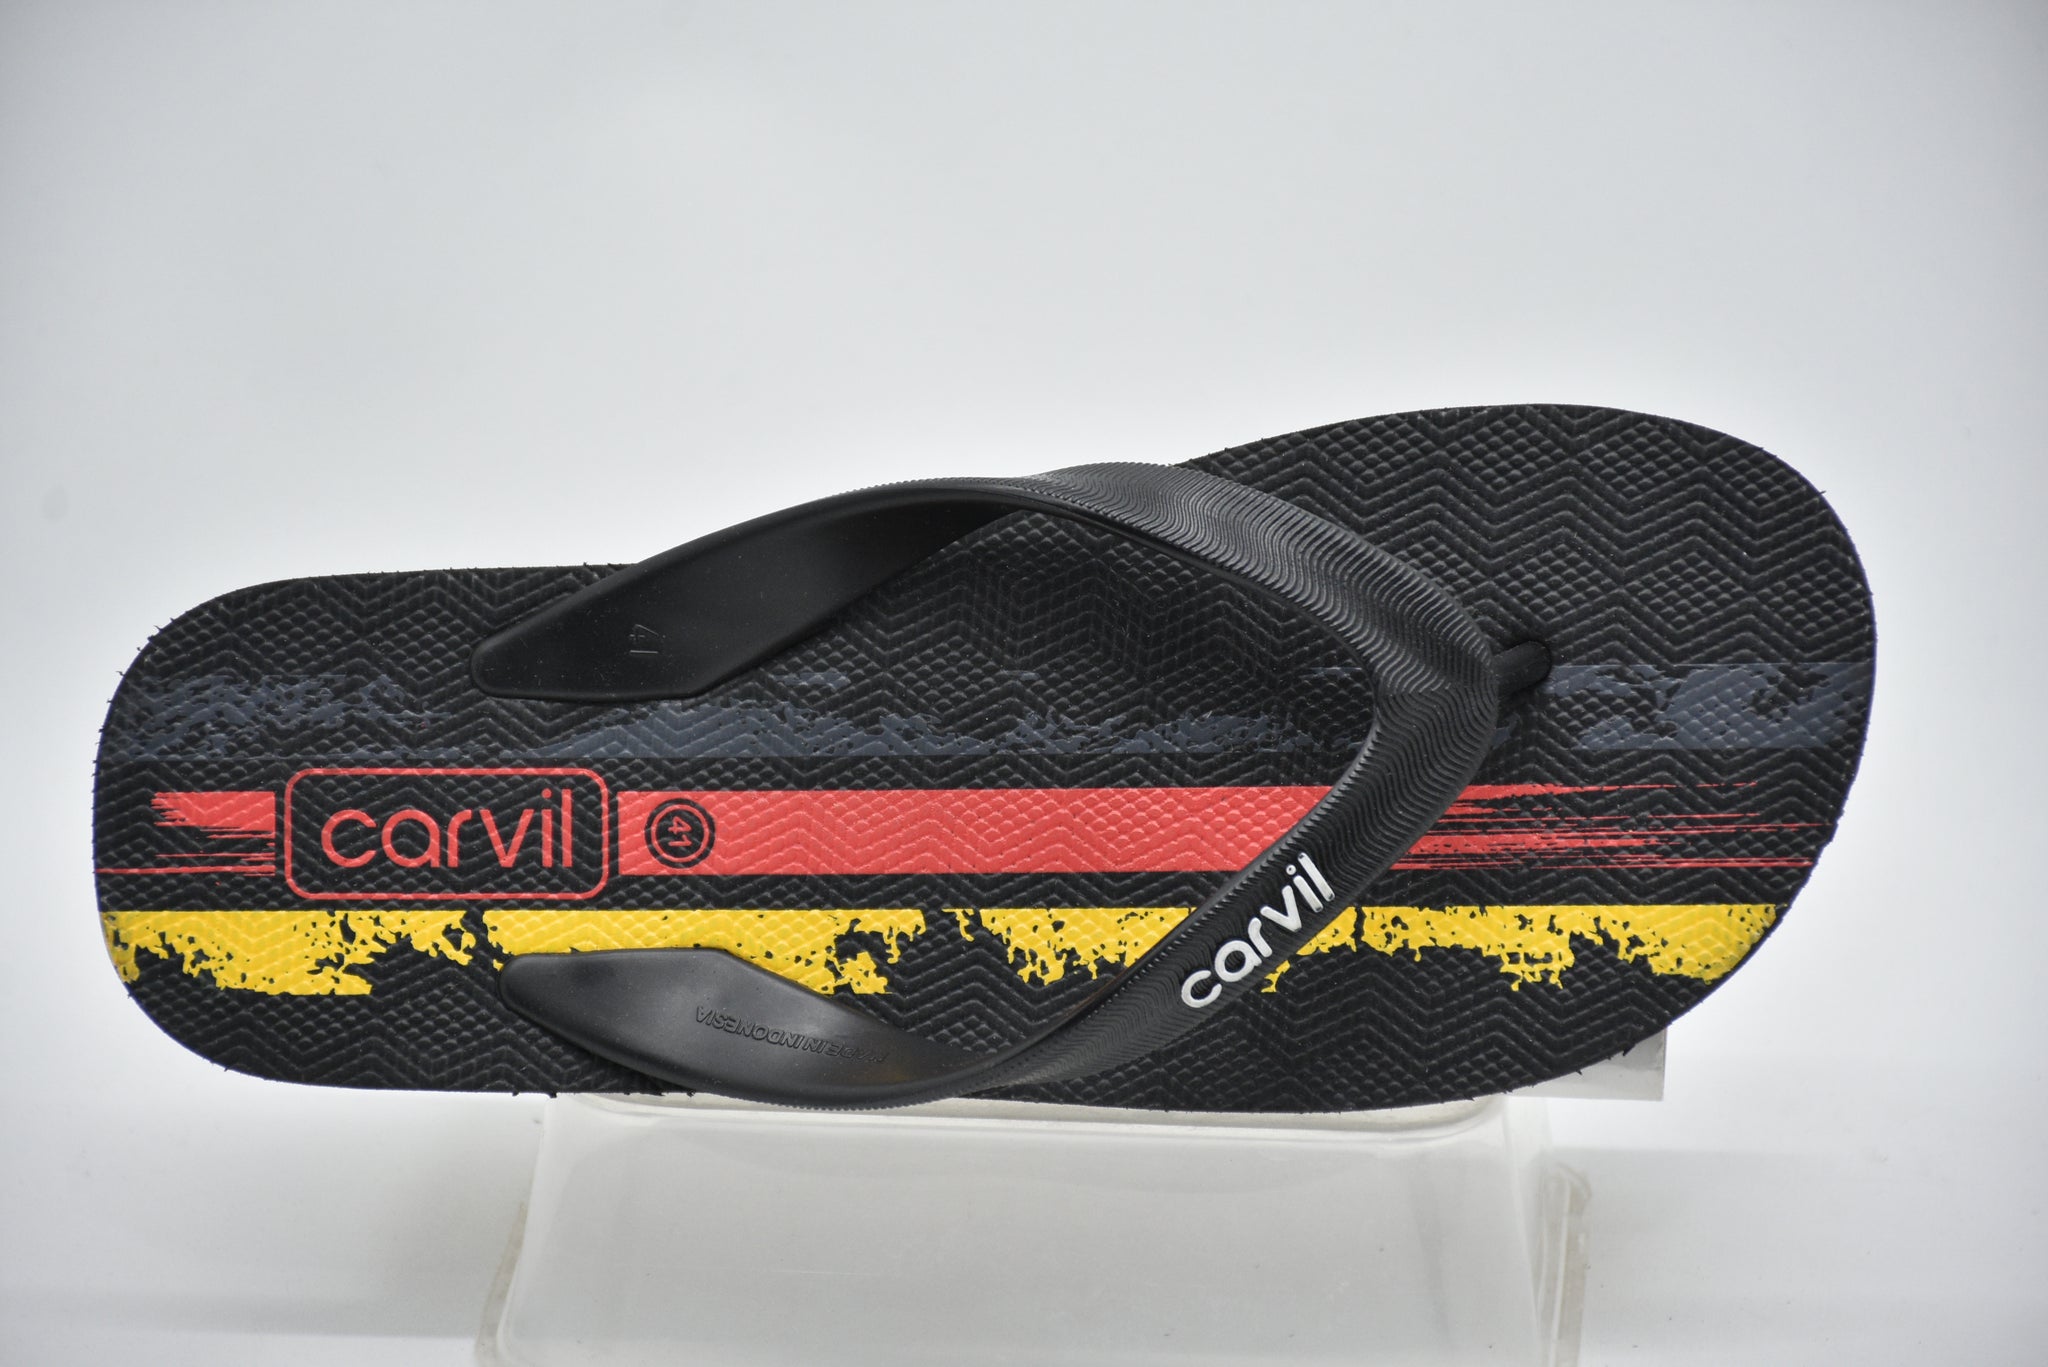 Carvil Sandal Jepit FlipFlop Pria Edisi Bola/WERNER-M - GREY/YELLOW/RED